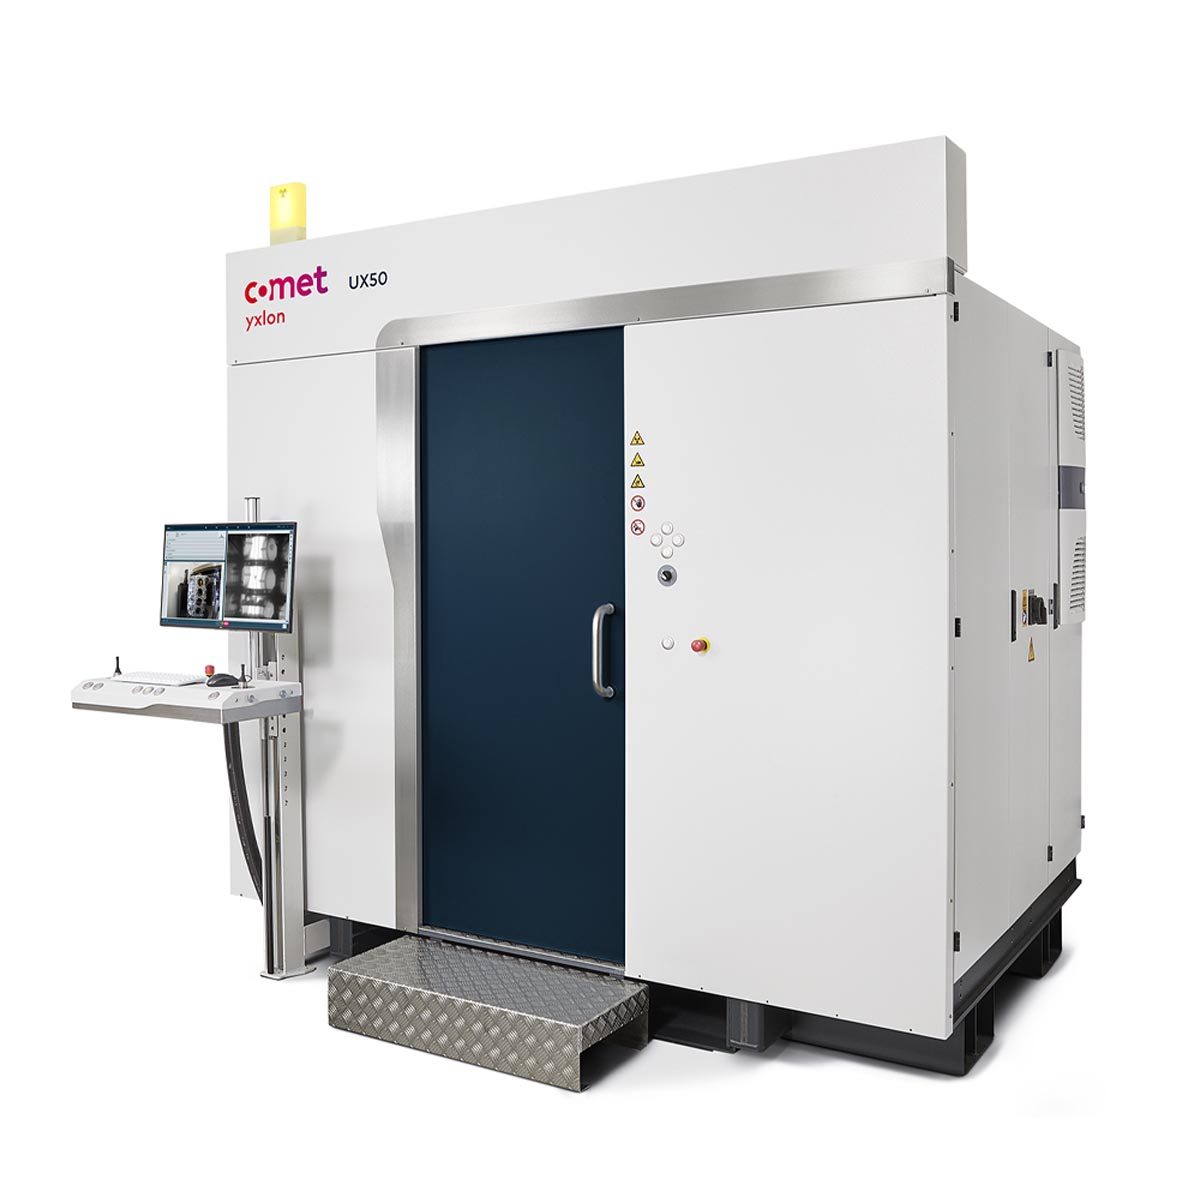 Comet Yxlon UX50 X-ray and CT inspection system 2